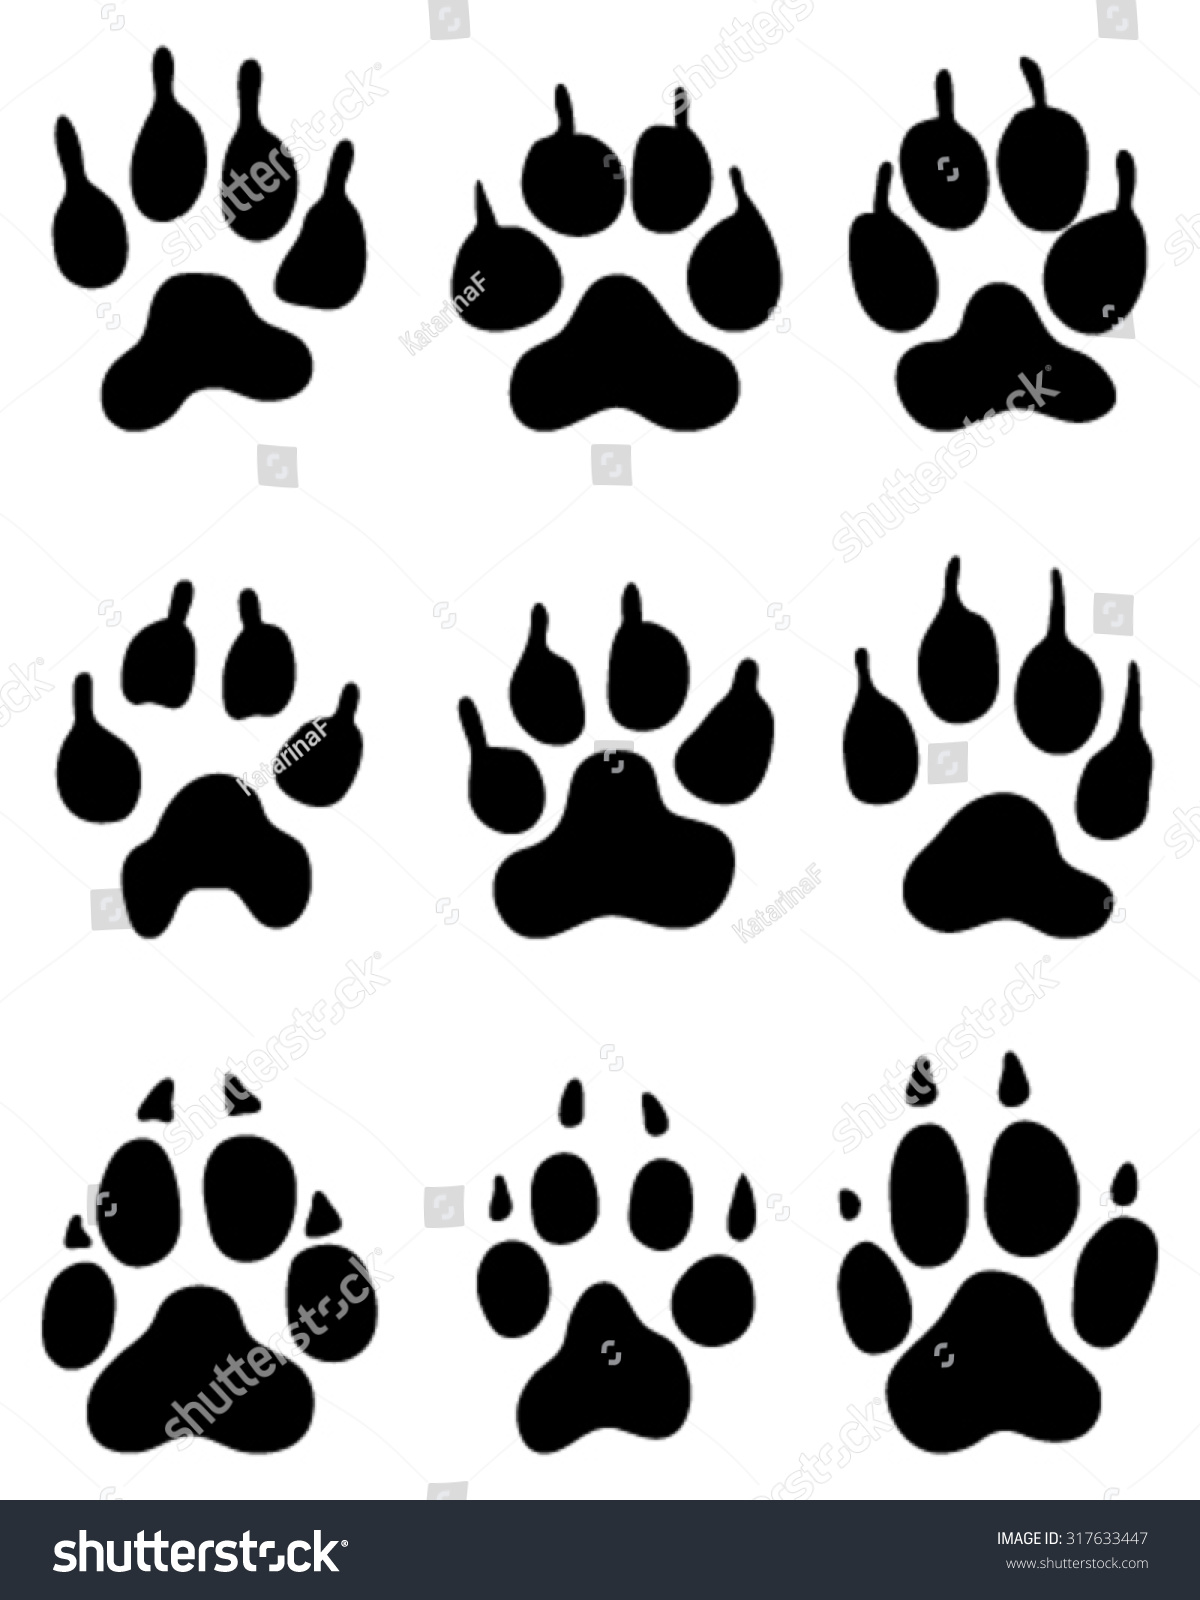 Print Of Wolf'S Paw, Vector - 317633447 : Shutterstock